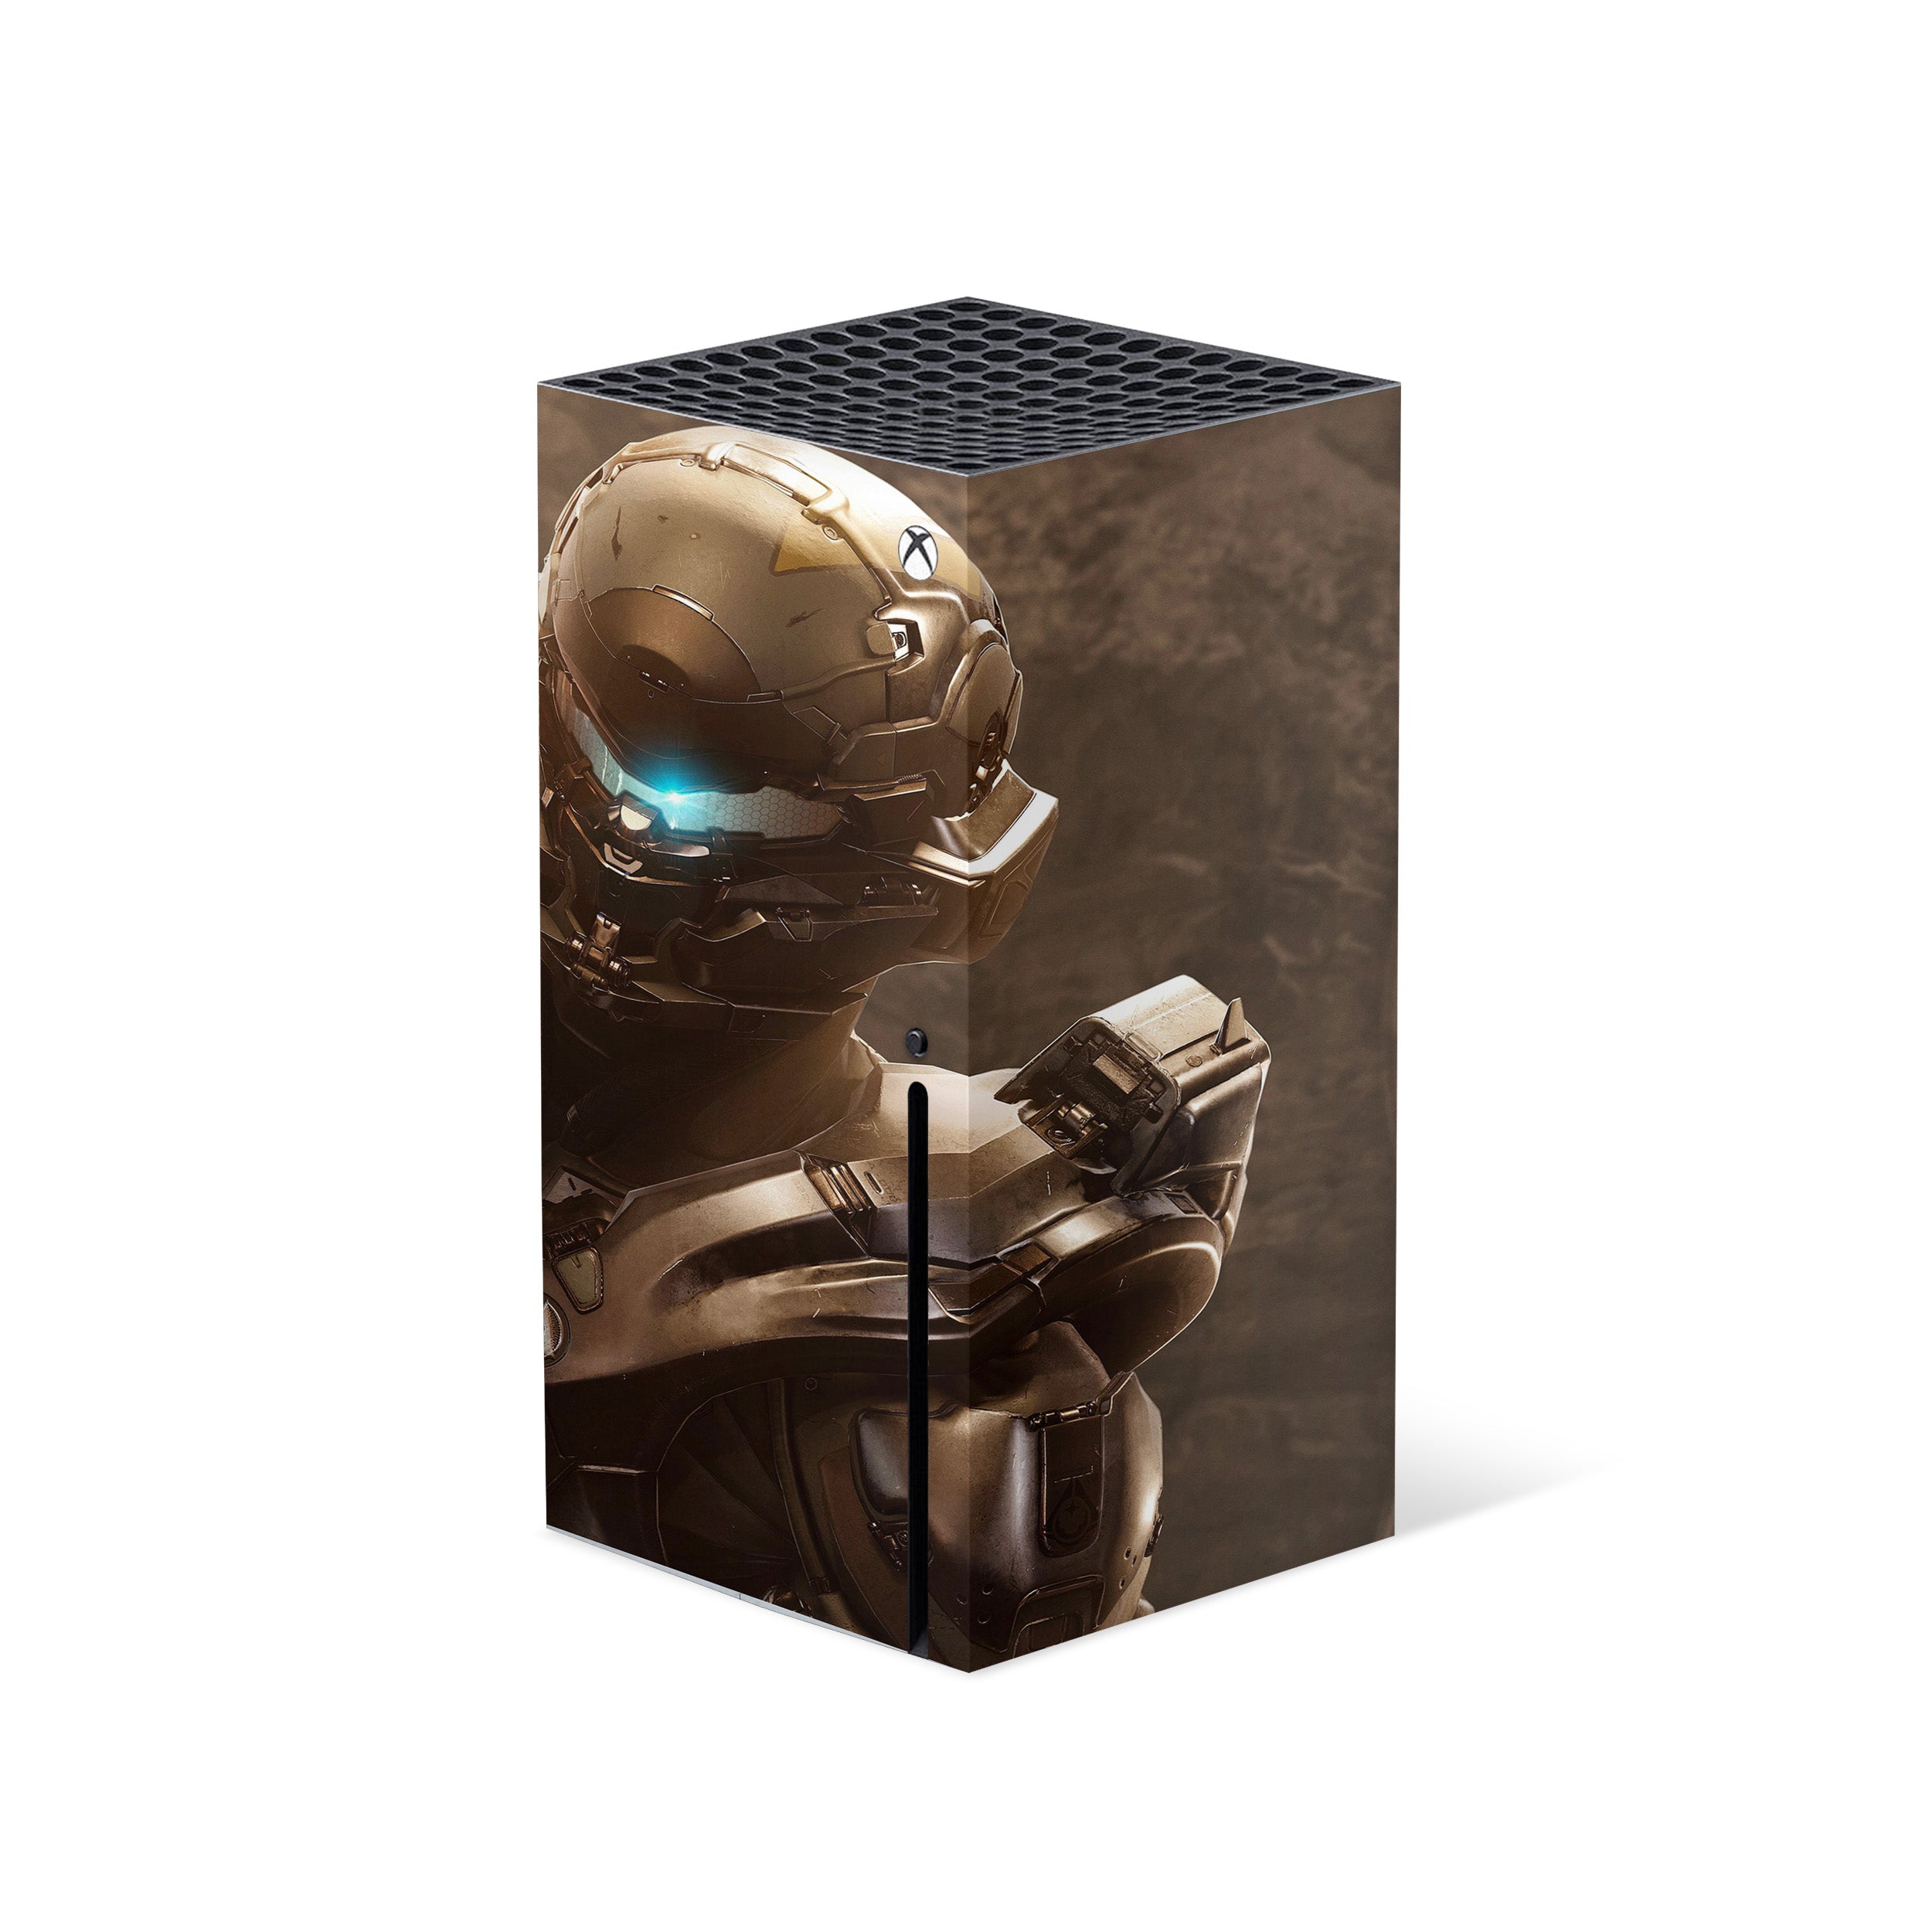 A video game skin featuring a Halo 5 design for the Xbox Series X.